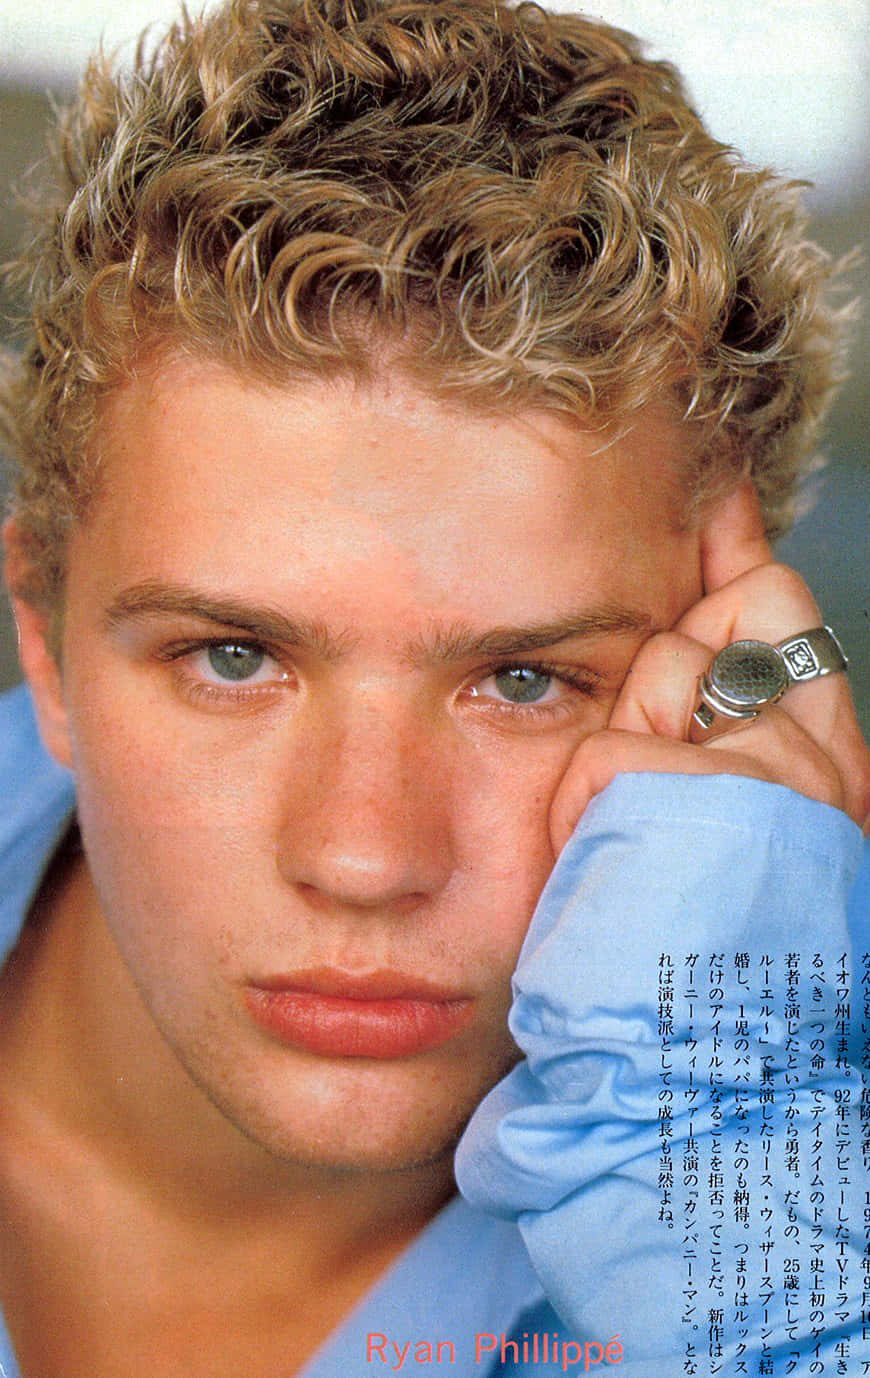 Ryan Phillippe Young Actor 90s Wallpaper